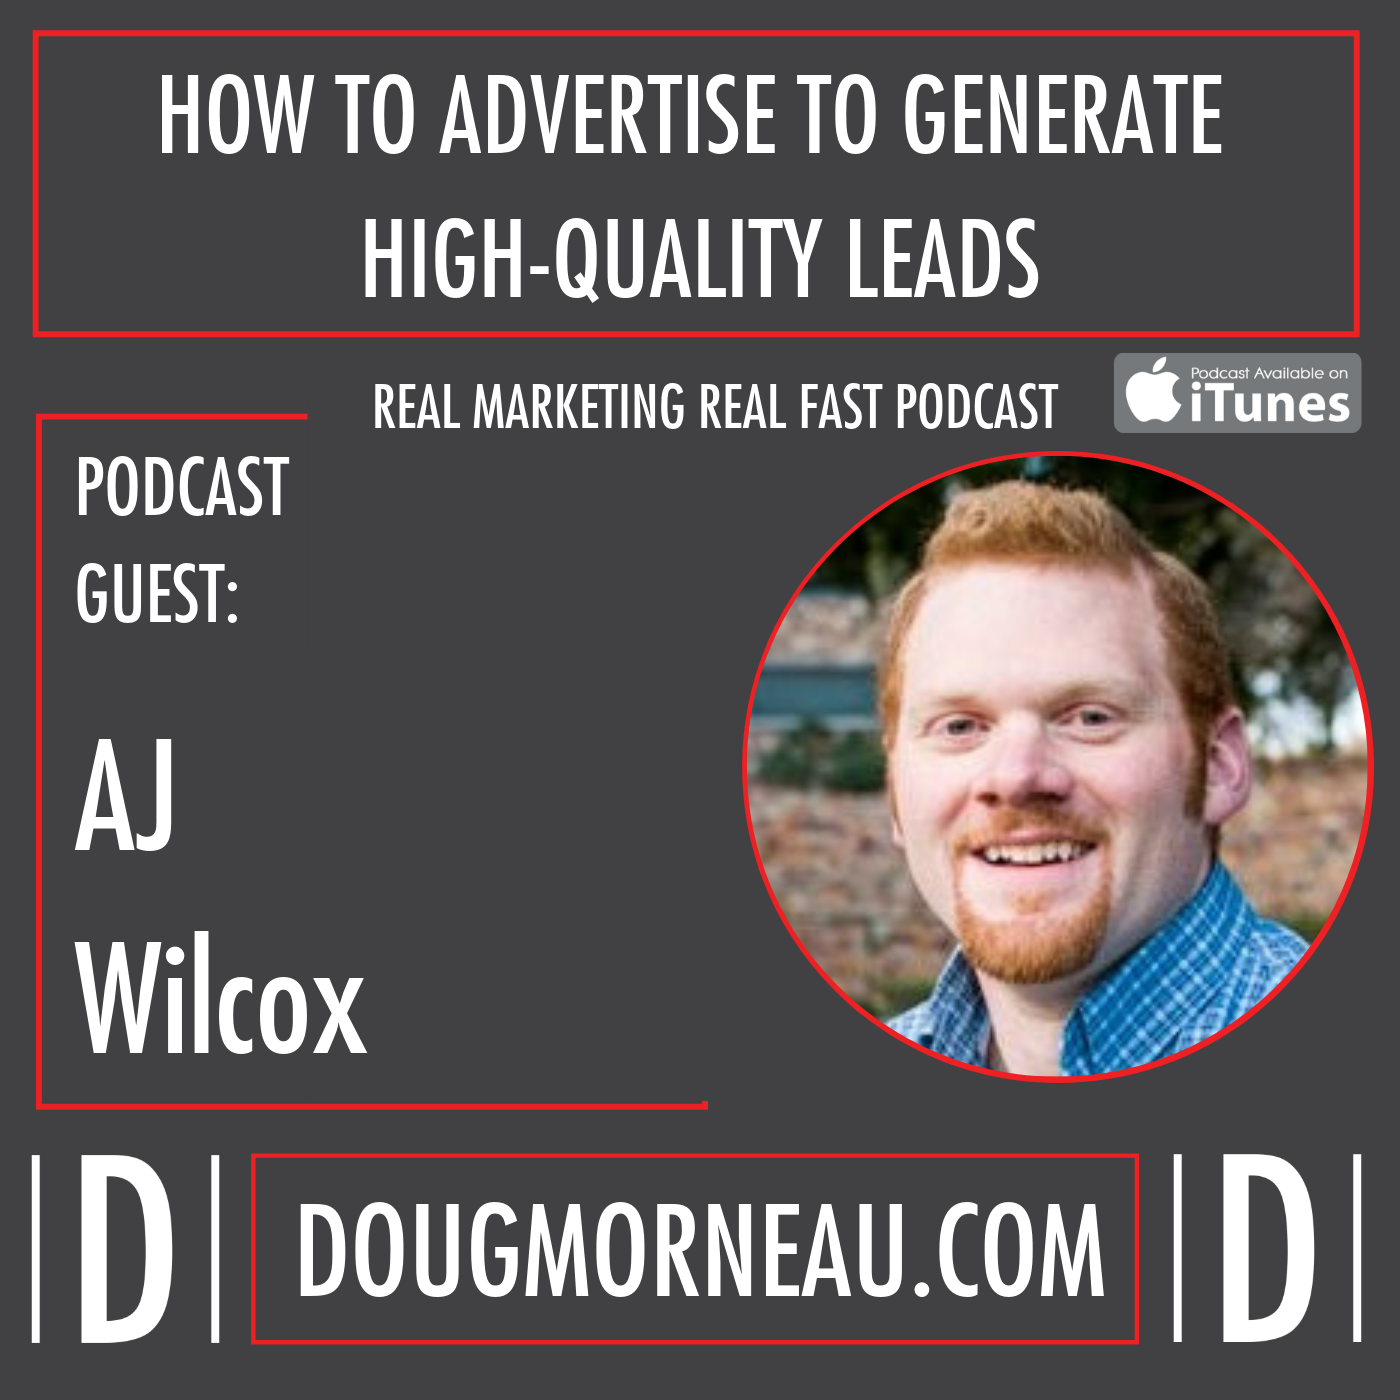 HOW TO ADVERTISE TO GENERATE HIGH-QUALITY LEADS AJ WILCOX - DOUG MORNEAU - REAL MARKETING REAL FAST PODCAST